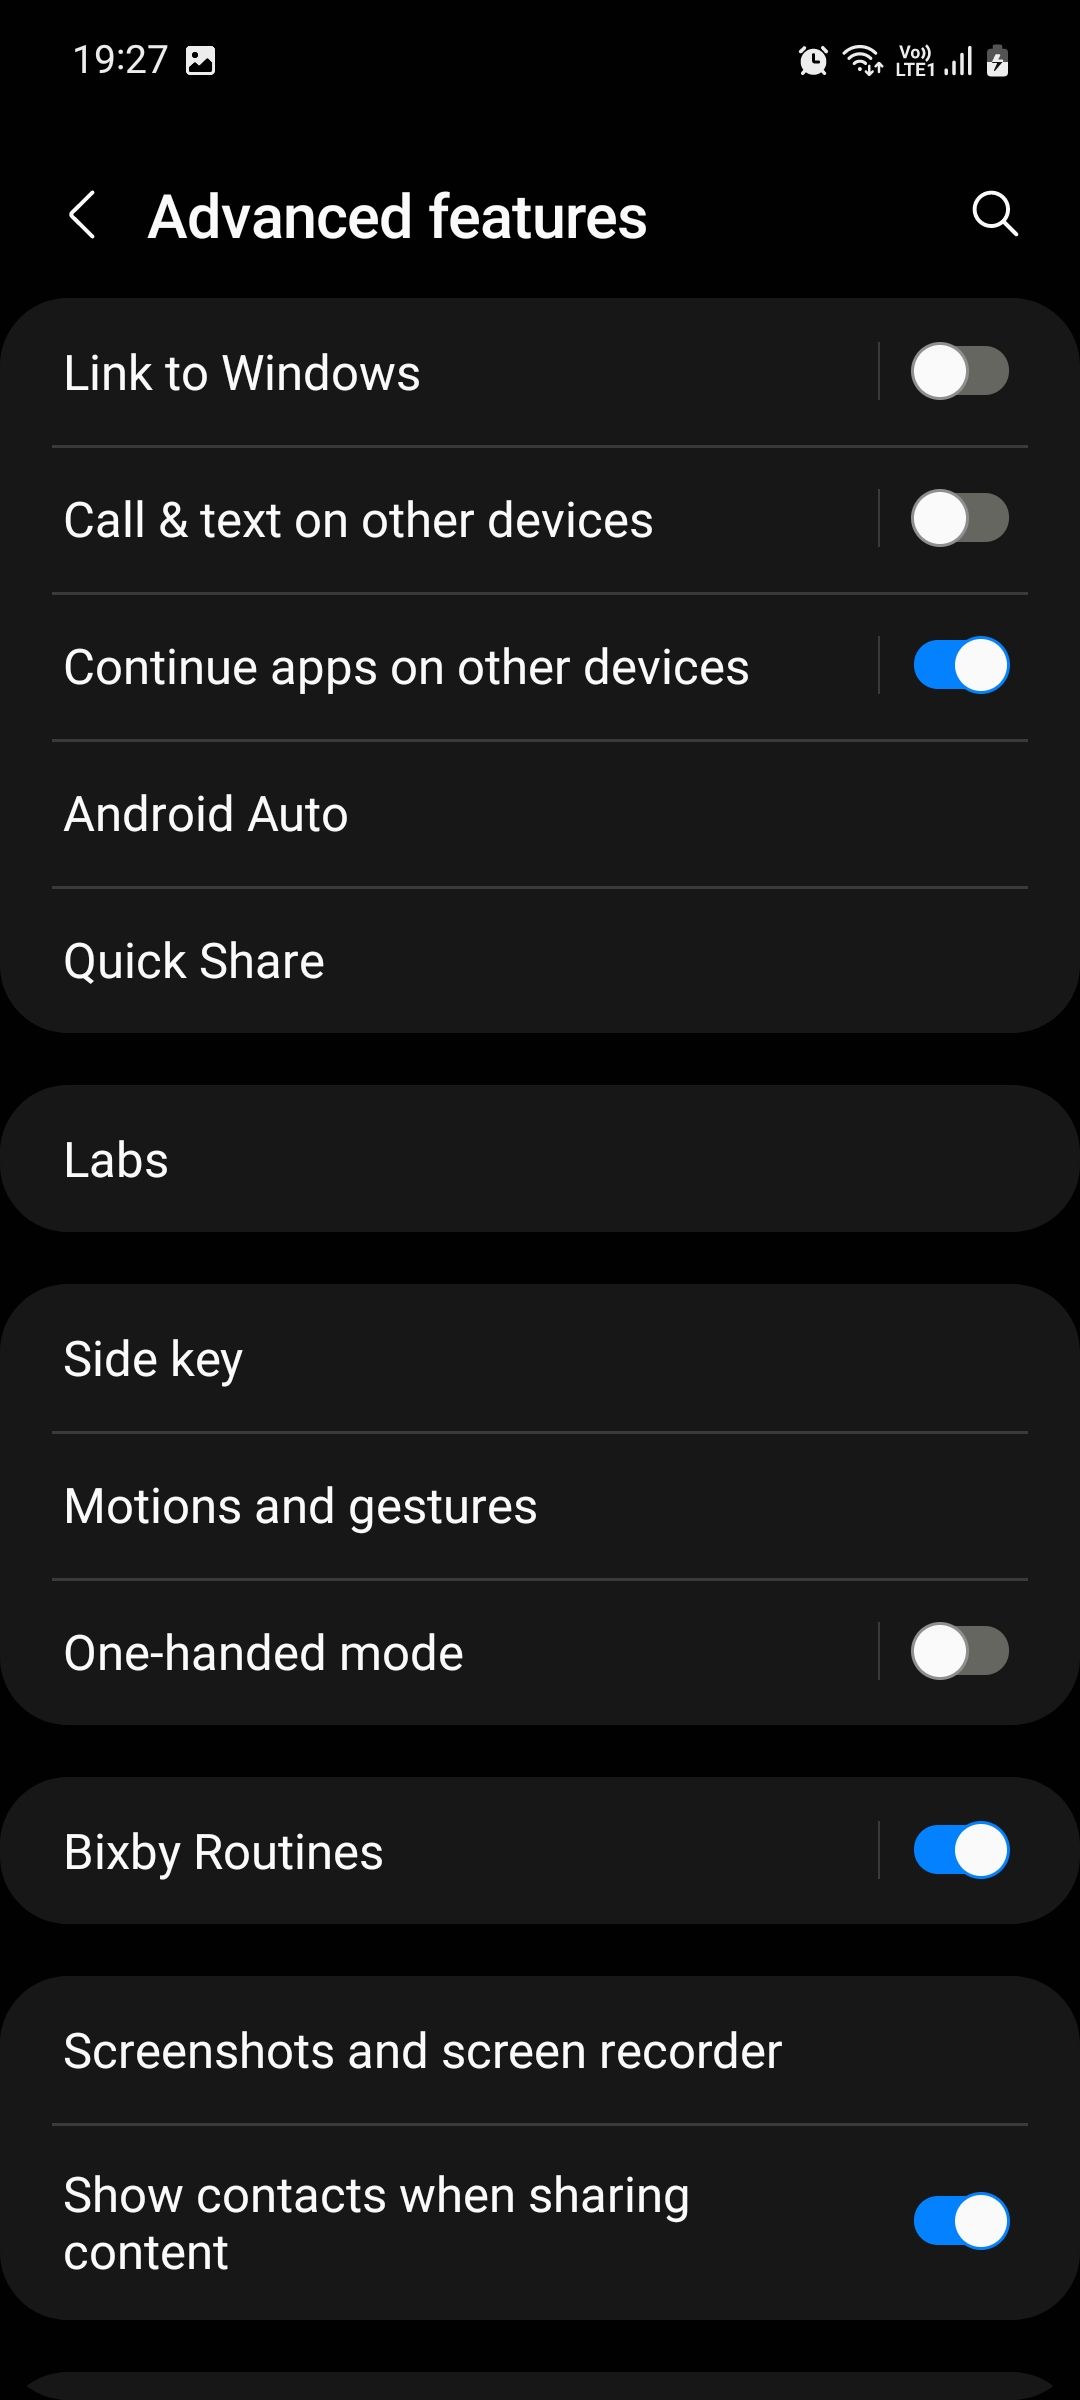 Samsung Galaxy settings advanced features